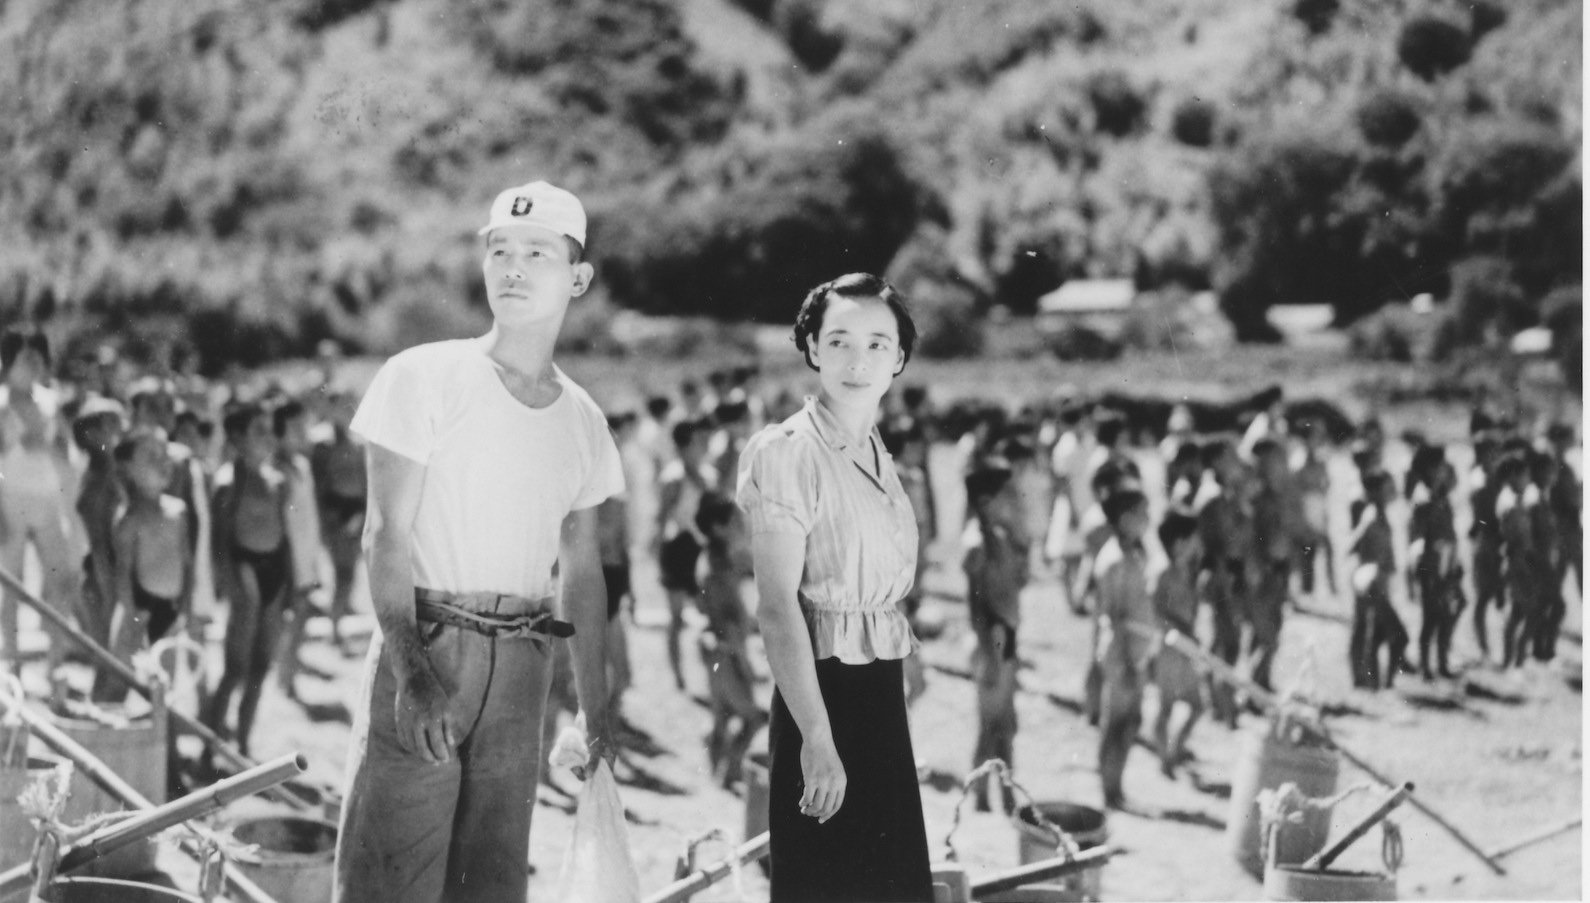 A black and white photo of a Japanese man and woman standing on the shore of a beach, looking off, as lines of children in formation in the background of the shot face the water